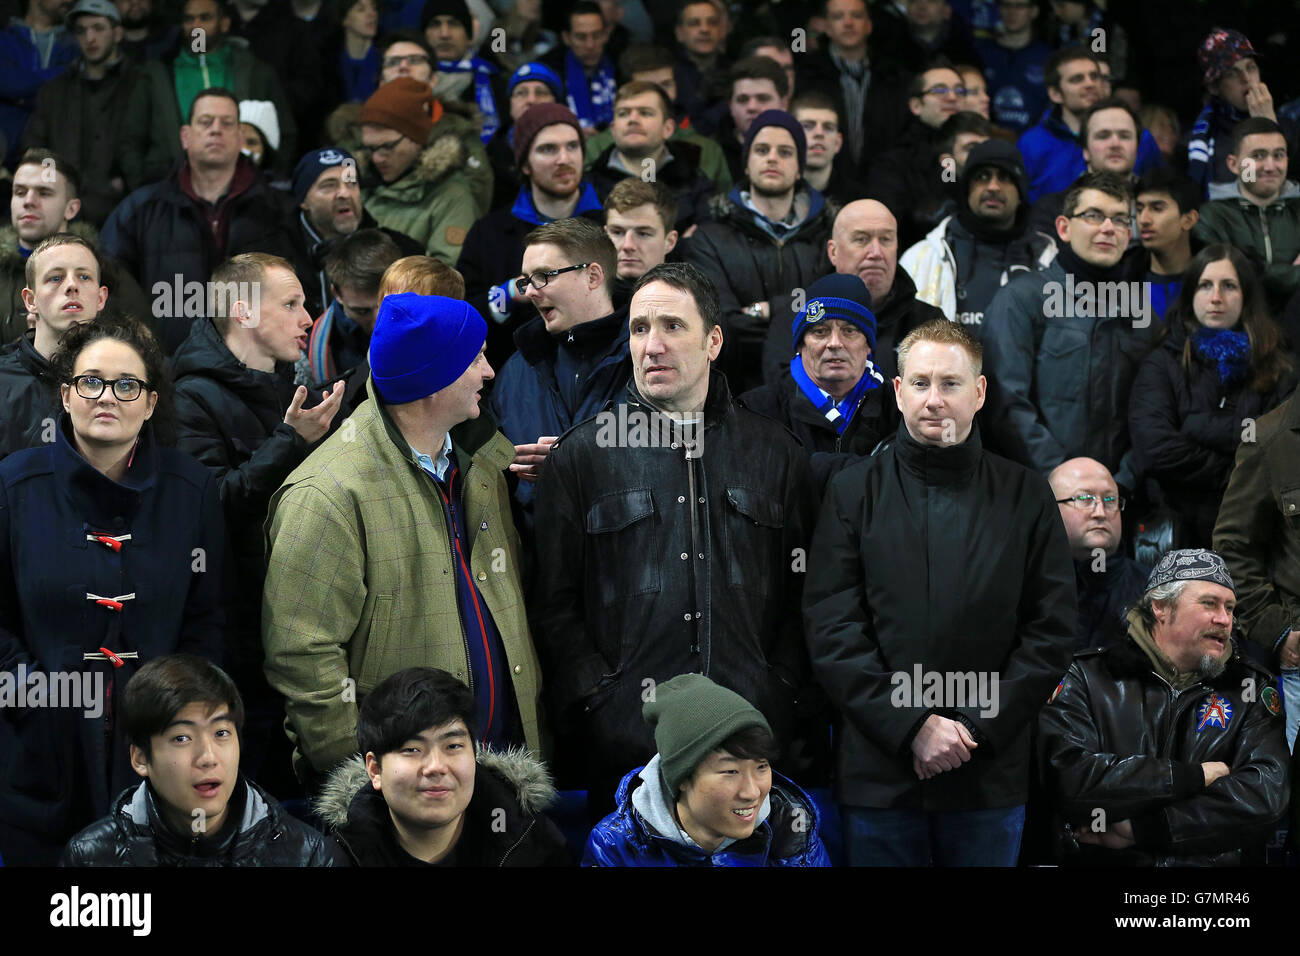 Soccer - Barclays Premier League - Chelsea v Everton - Stamford Bridge. Everton supporters in the stands at Stamford Bridge. Stock Photo